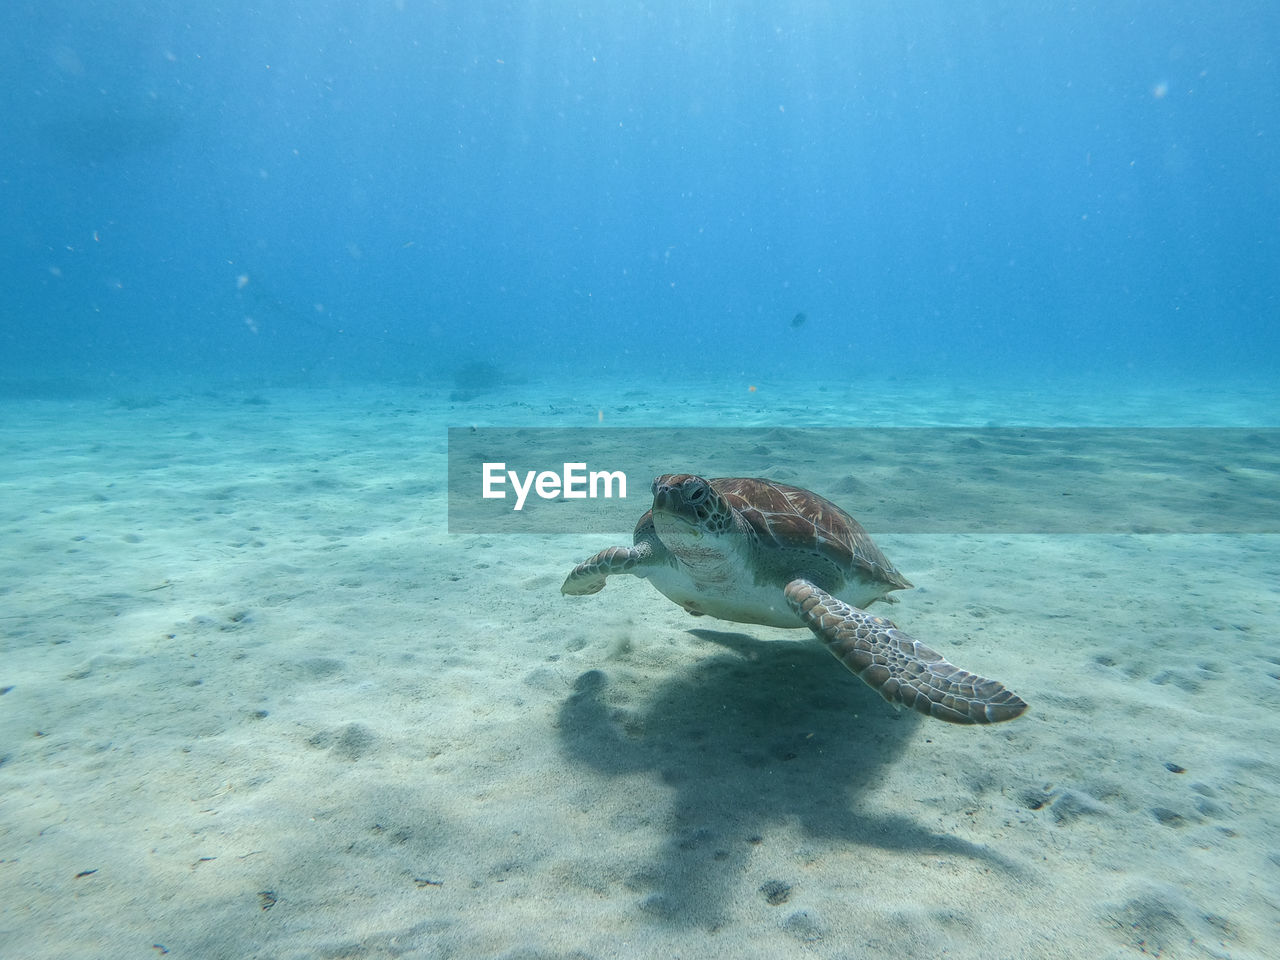 VIEW OF A TURTLE IN THE SEA